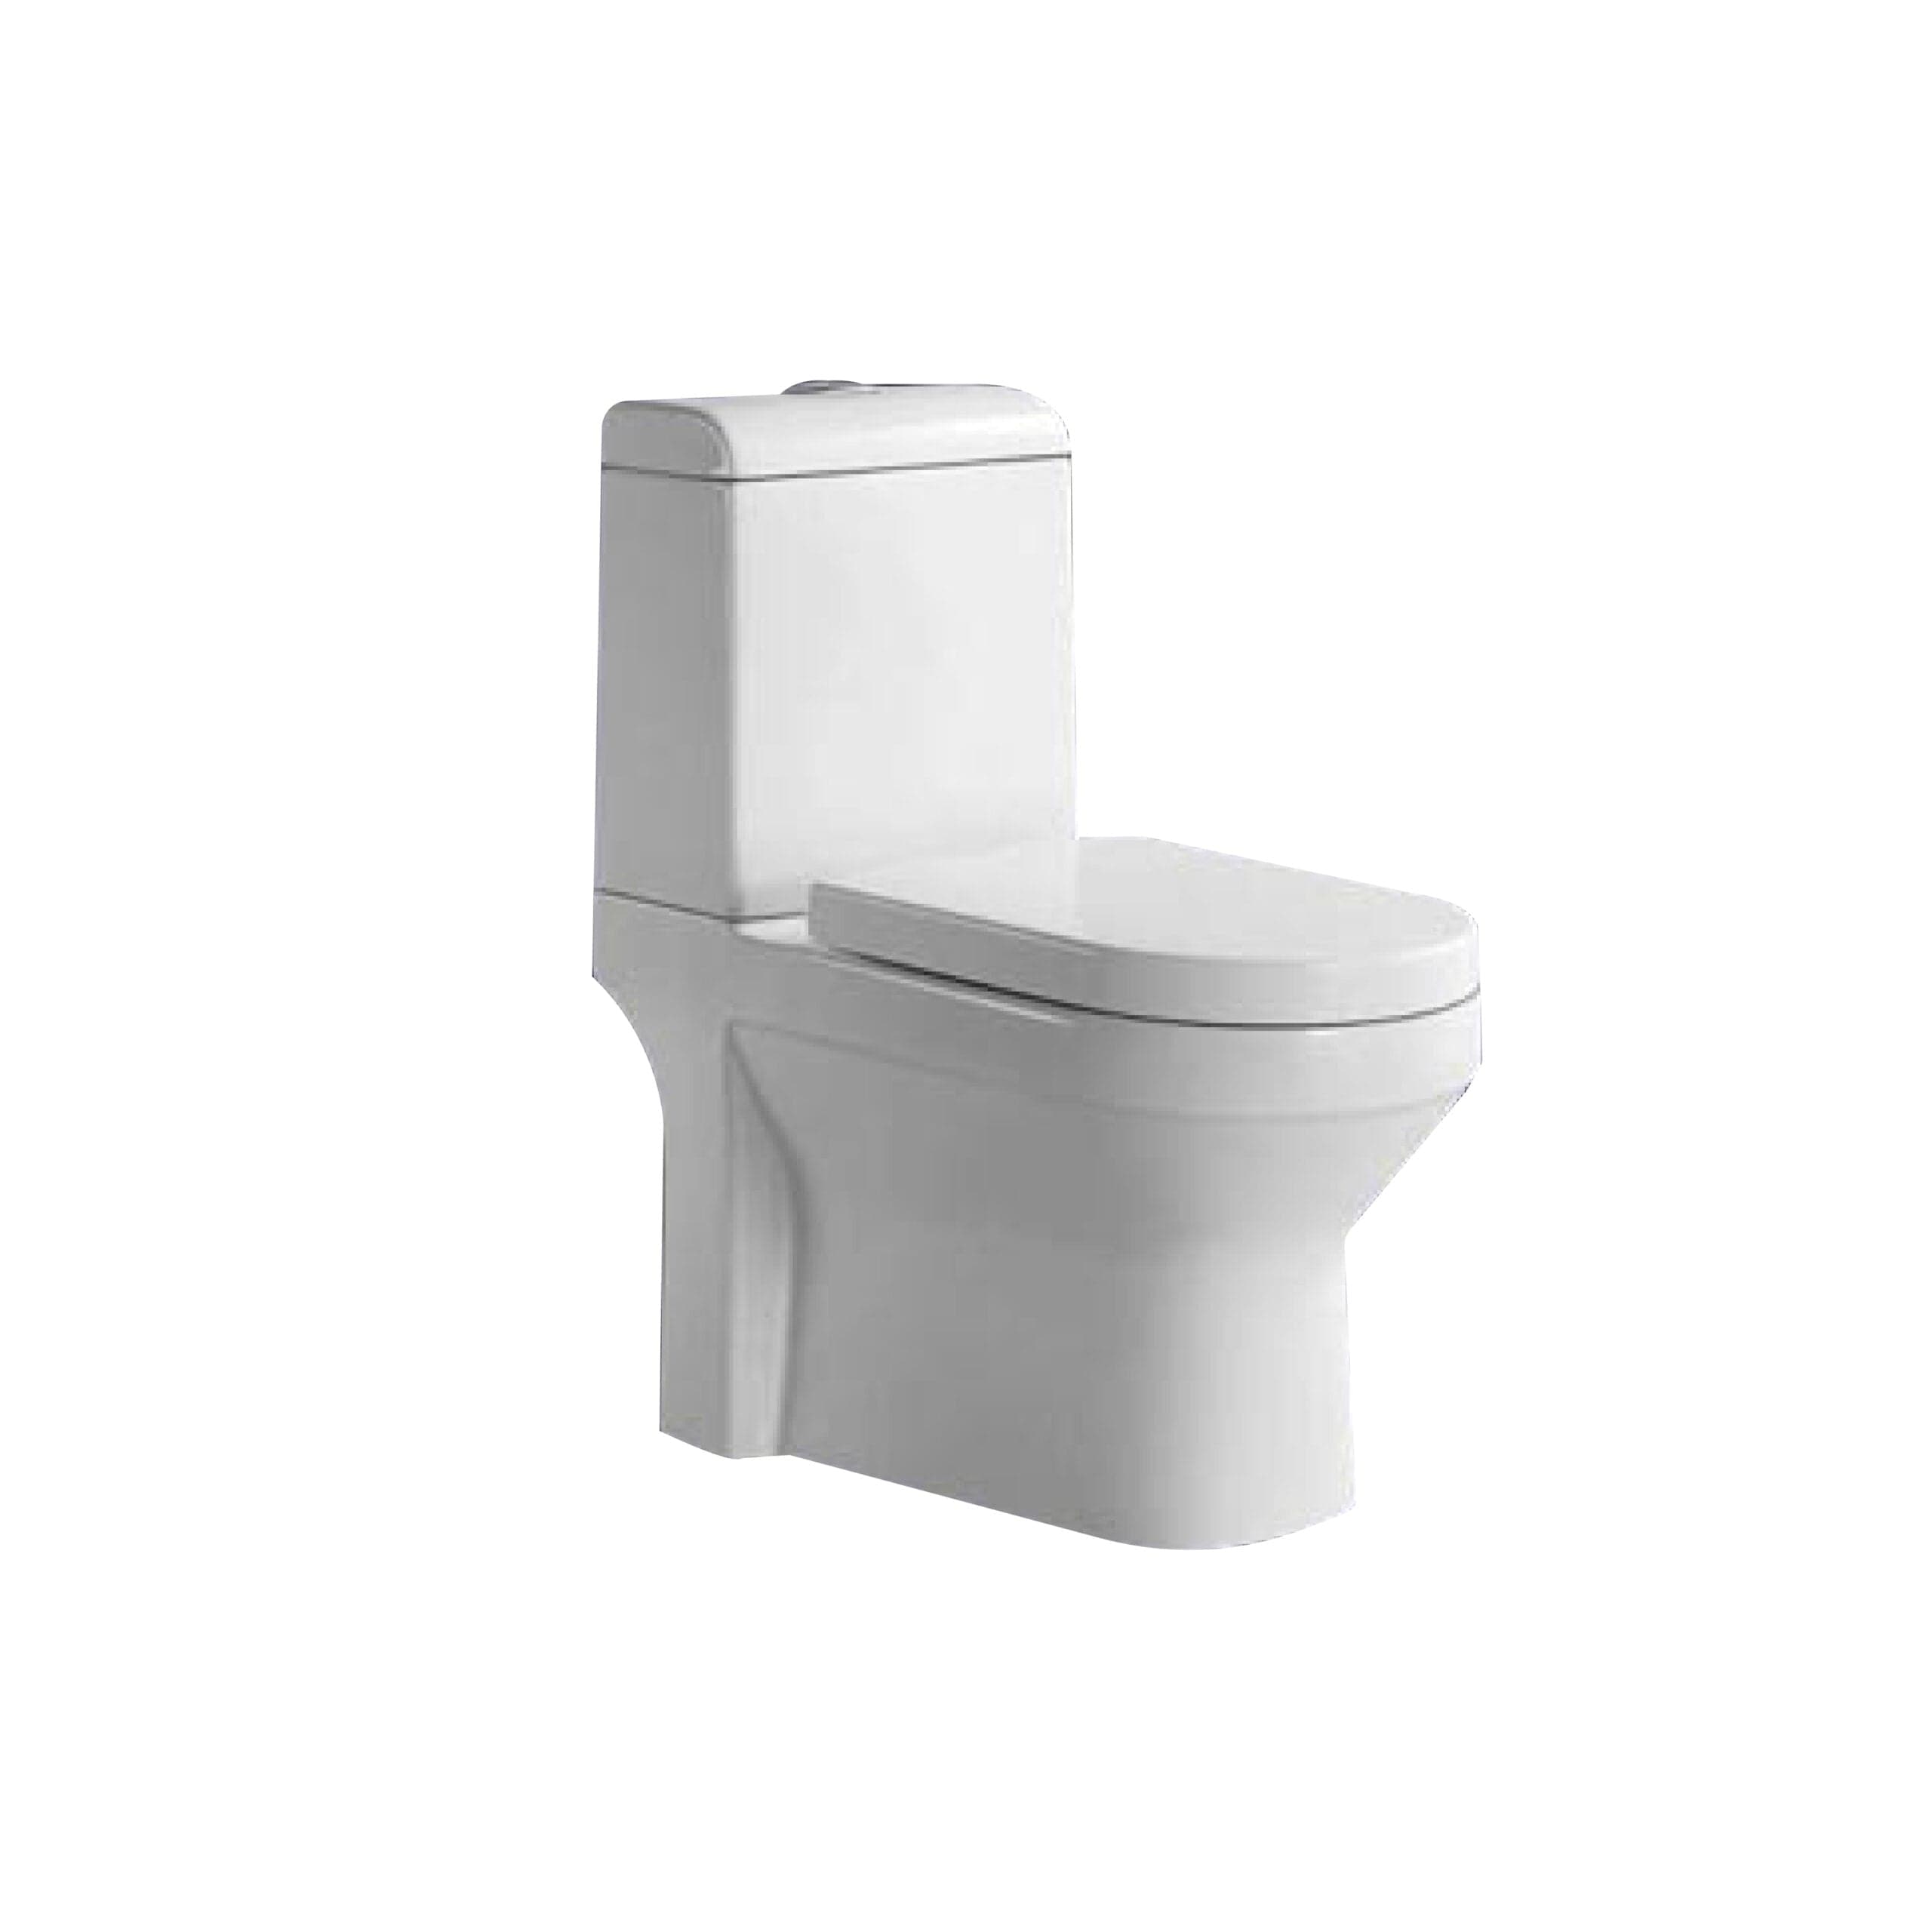 One-piece Washdown Water Closet 690 x 350 x 805mm - AP503 | Supply Master | Accra, Ghana Toilet & Urinal Buy Tools hardware Building materials